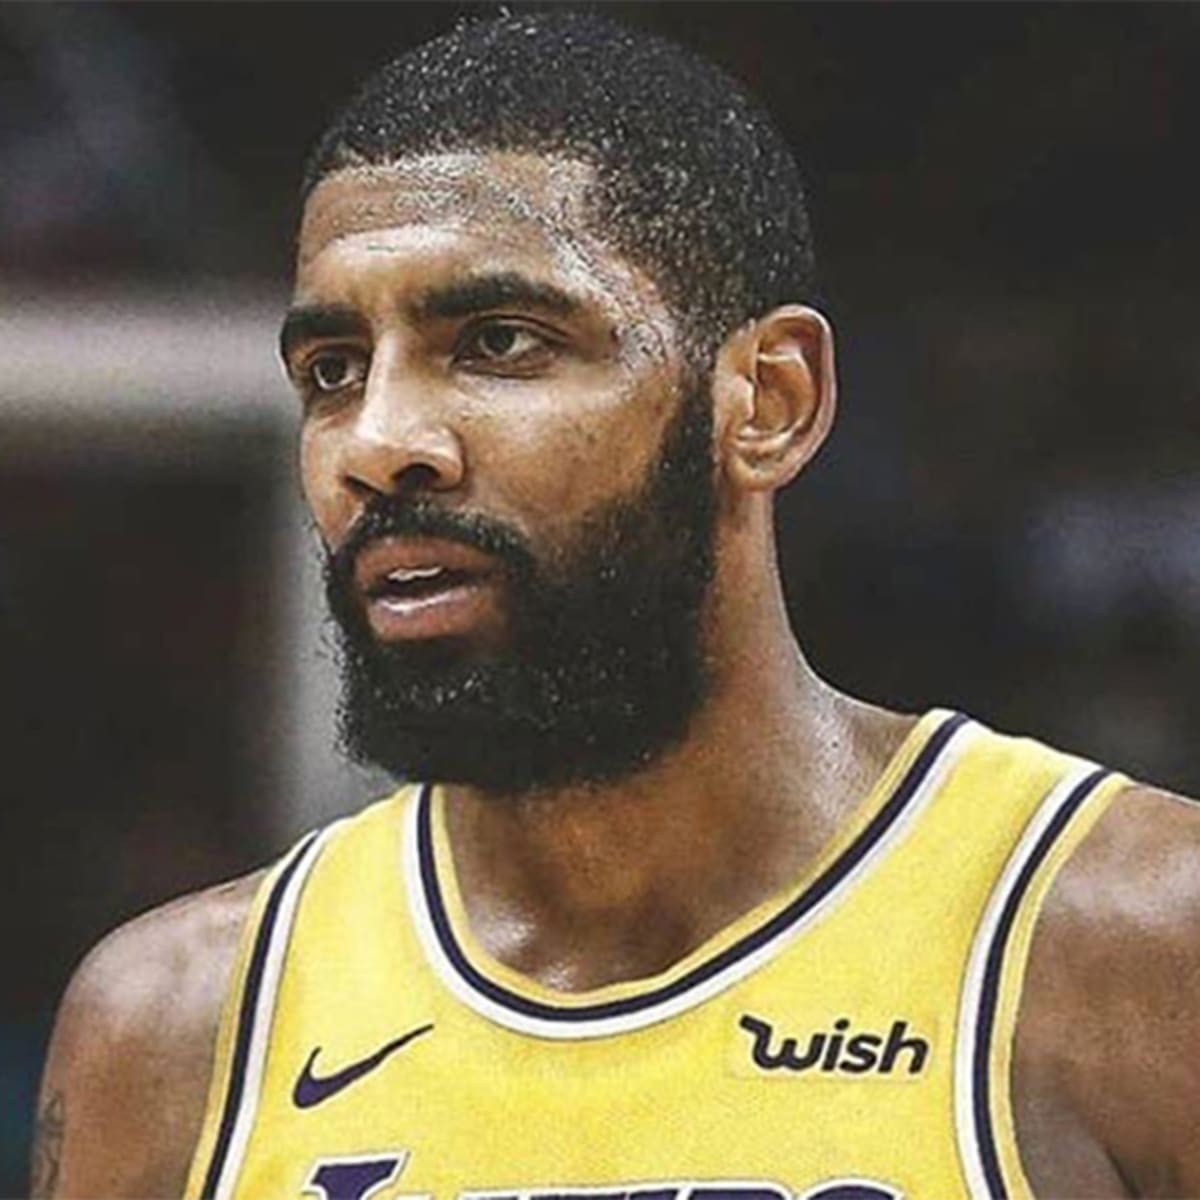 kyrie irving lakers uniform